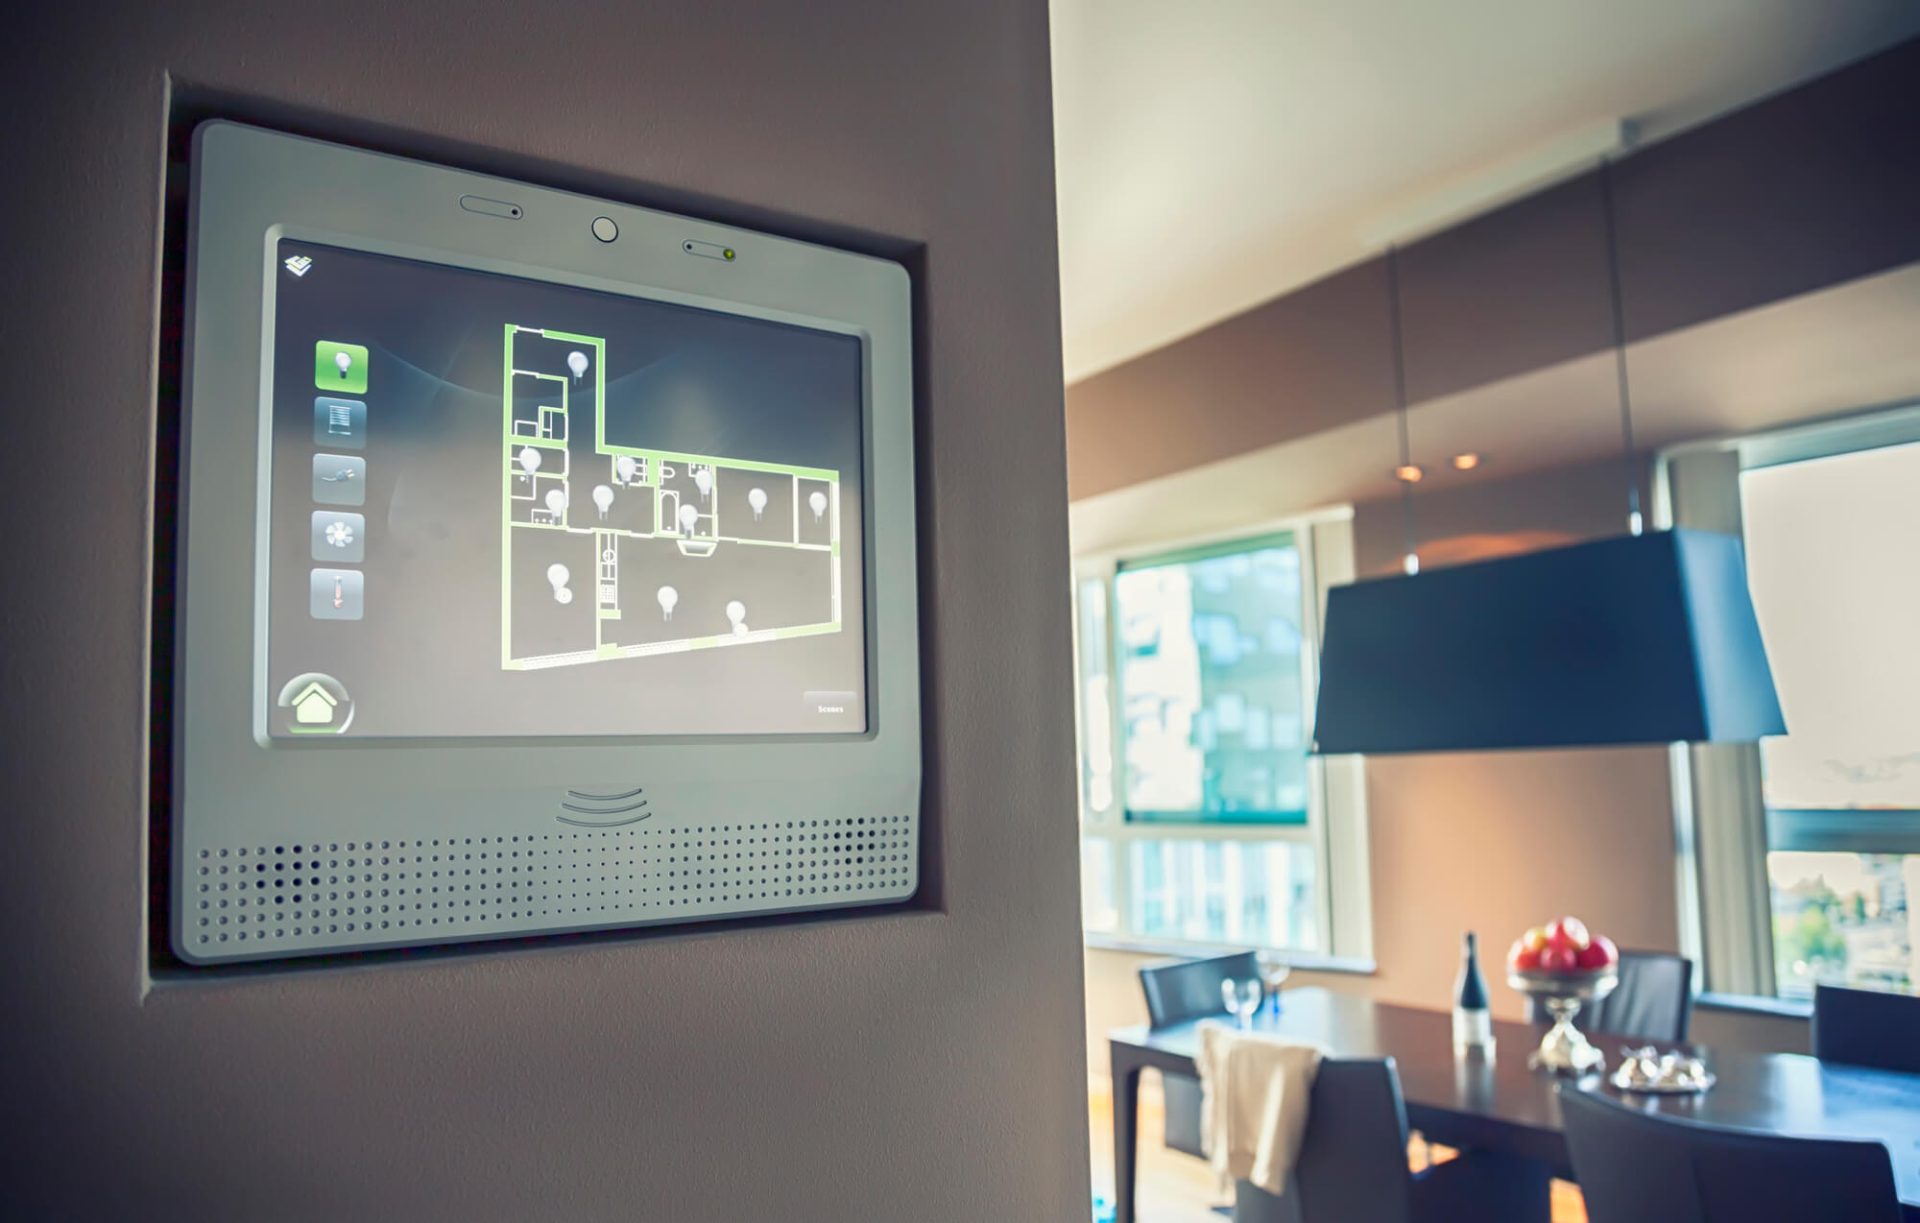 programmable thermostats can help you heat your home efficiently.